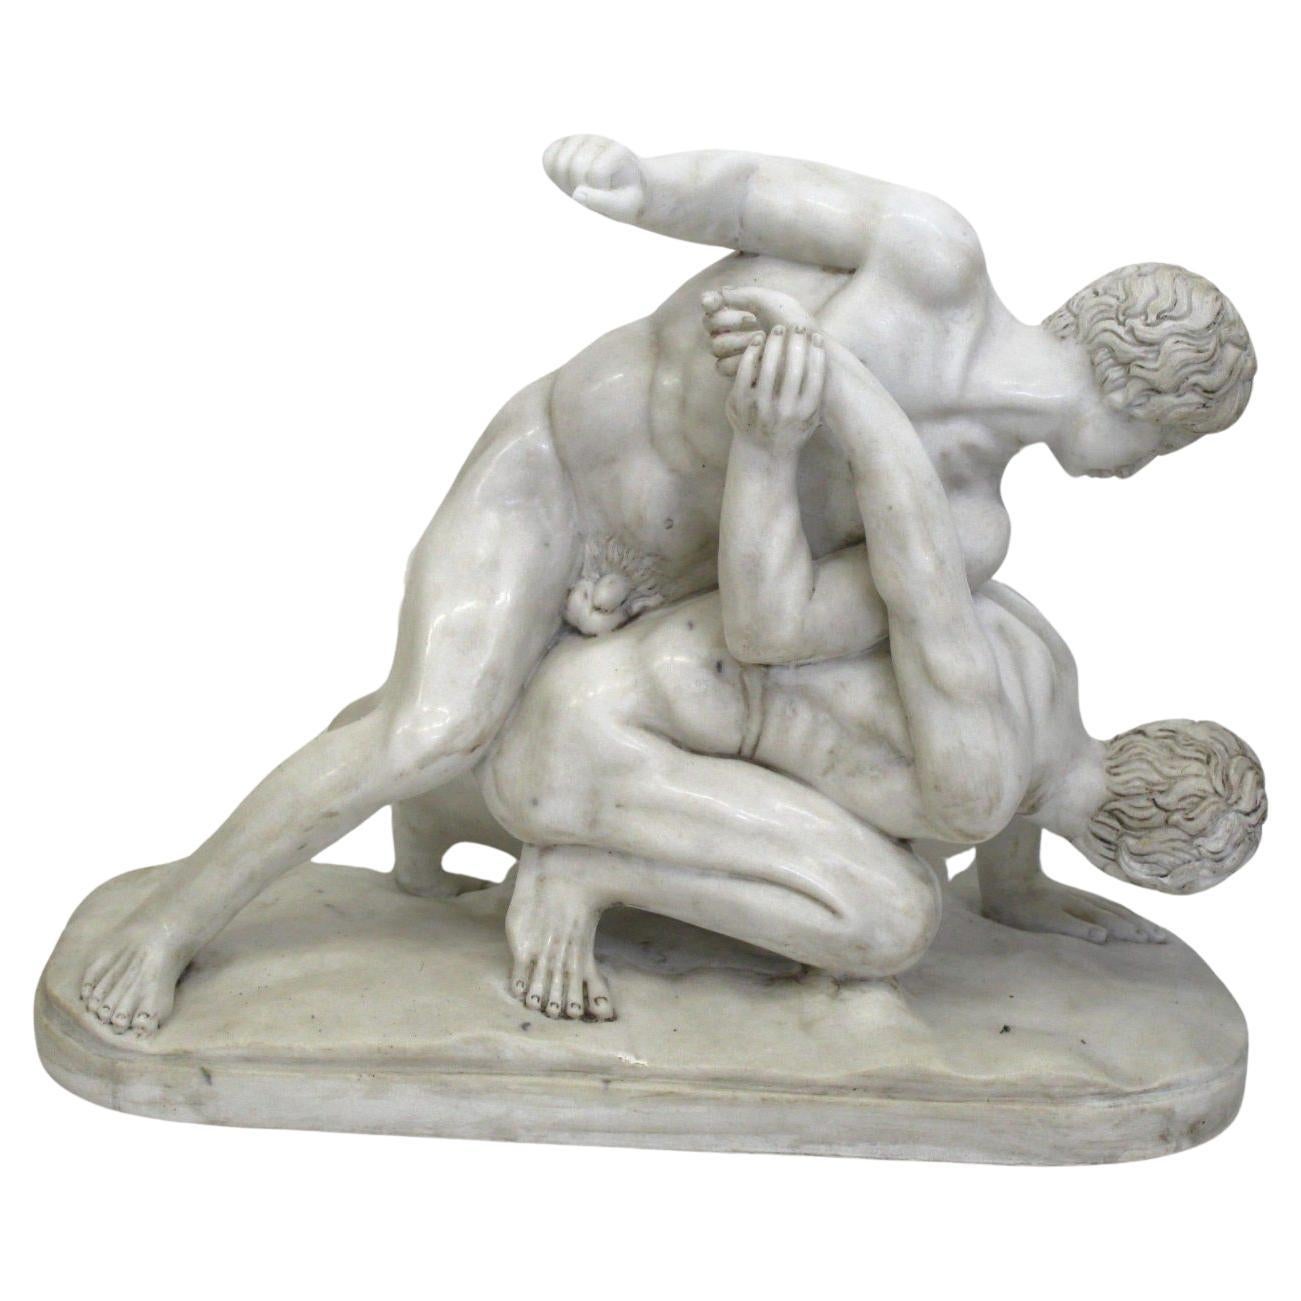 Sculpture of Wrestlers, in white marble